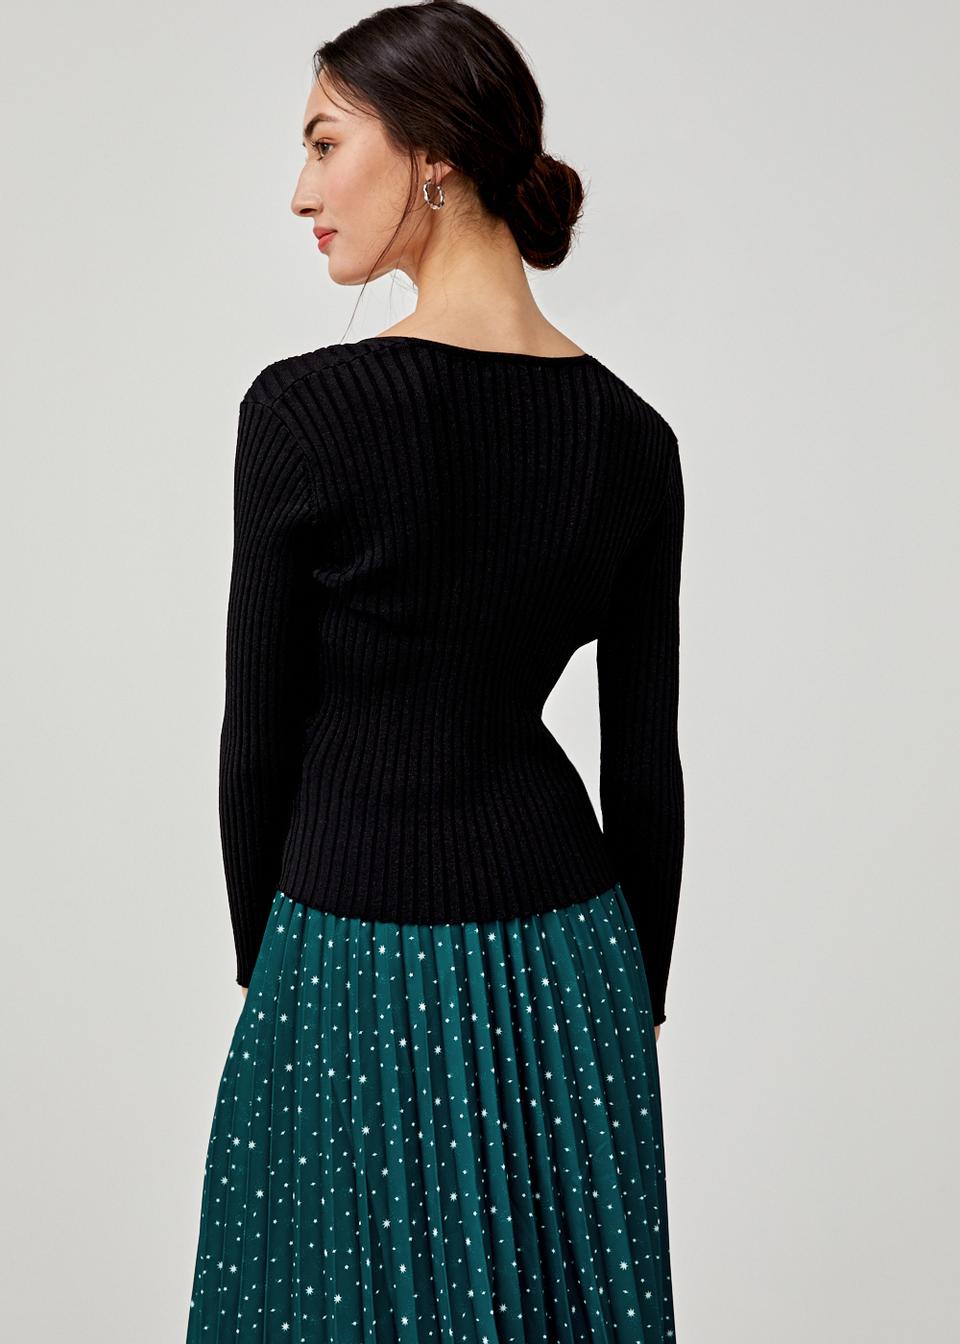 Iona Shimmer Knit Sweater